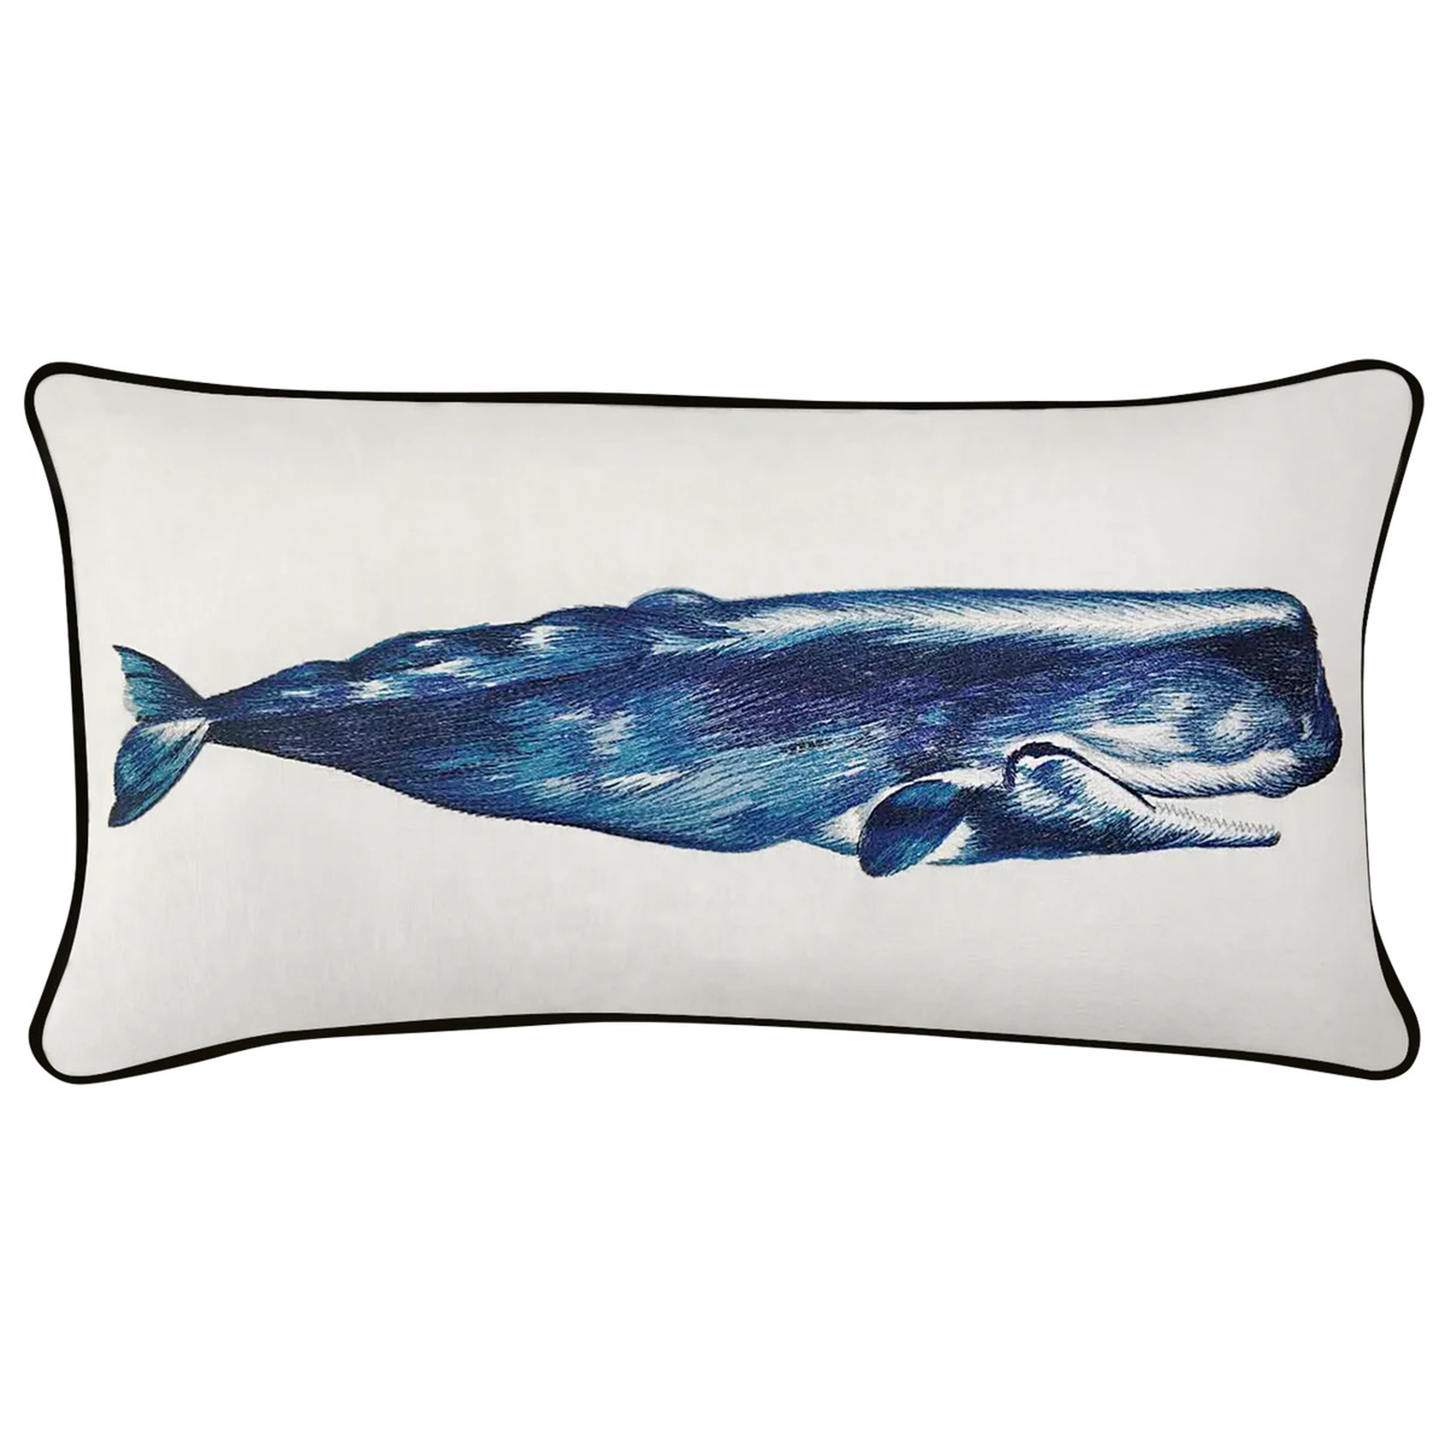 Embroidered Whale Pillow